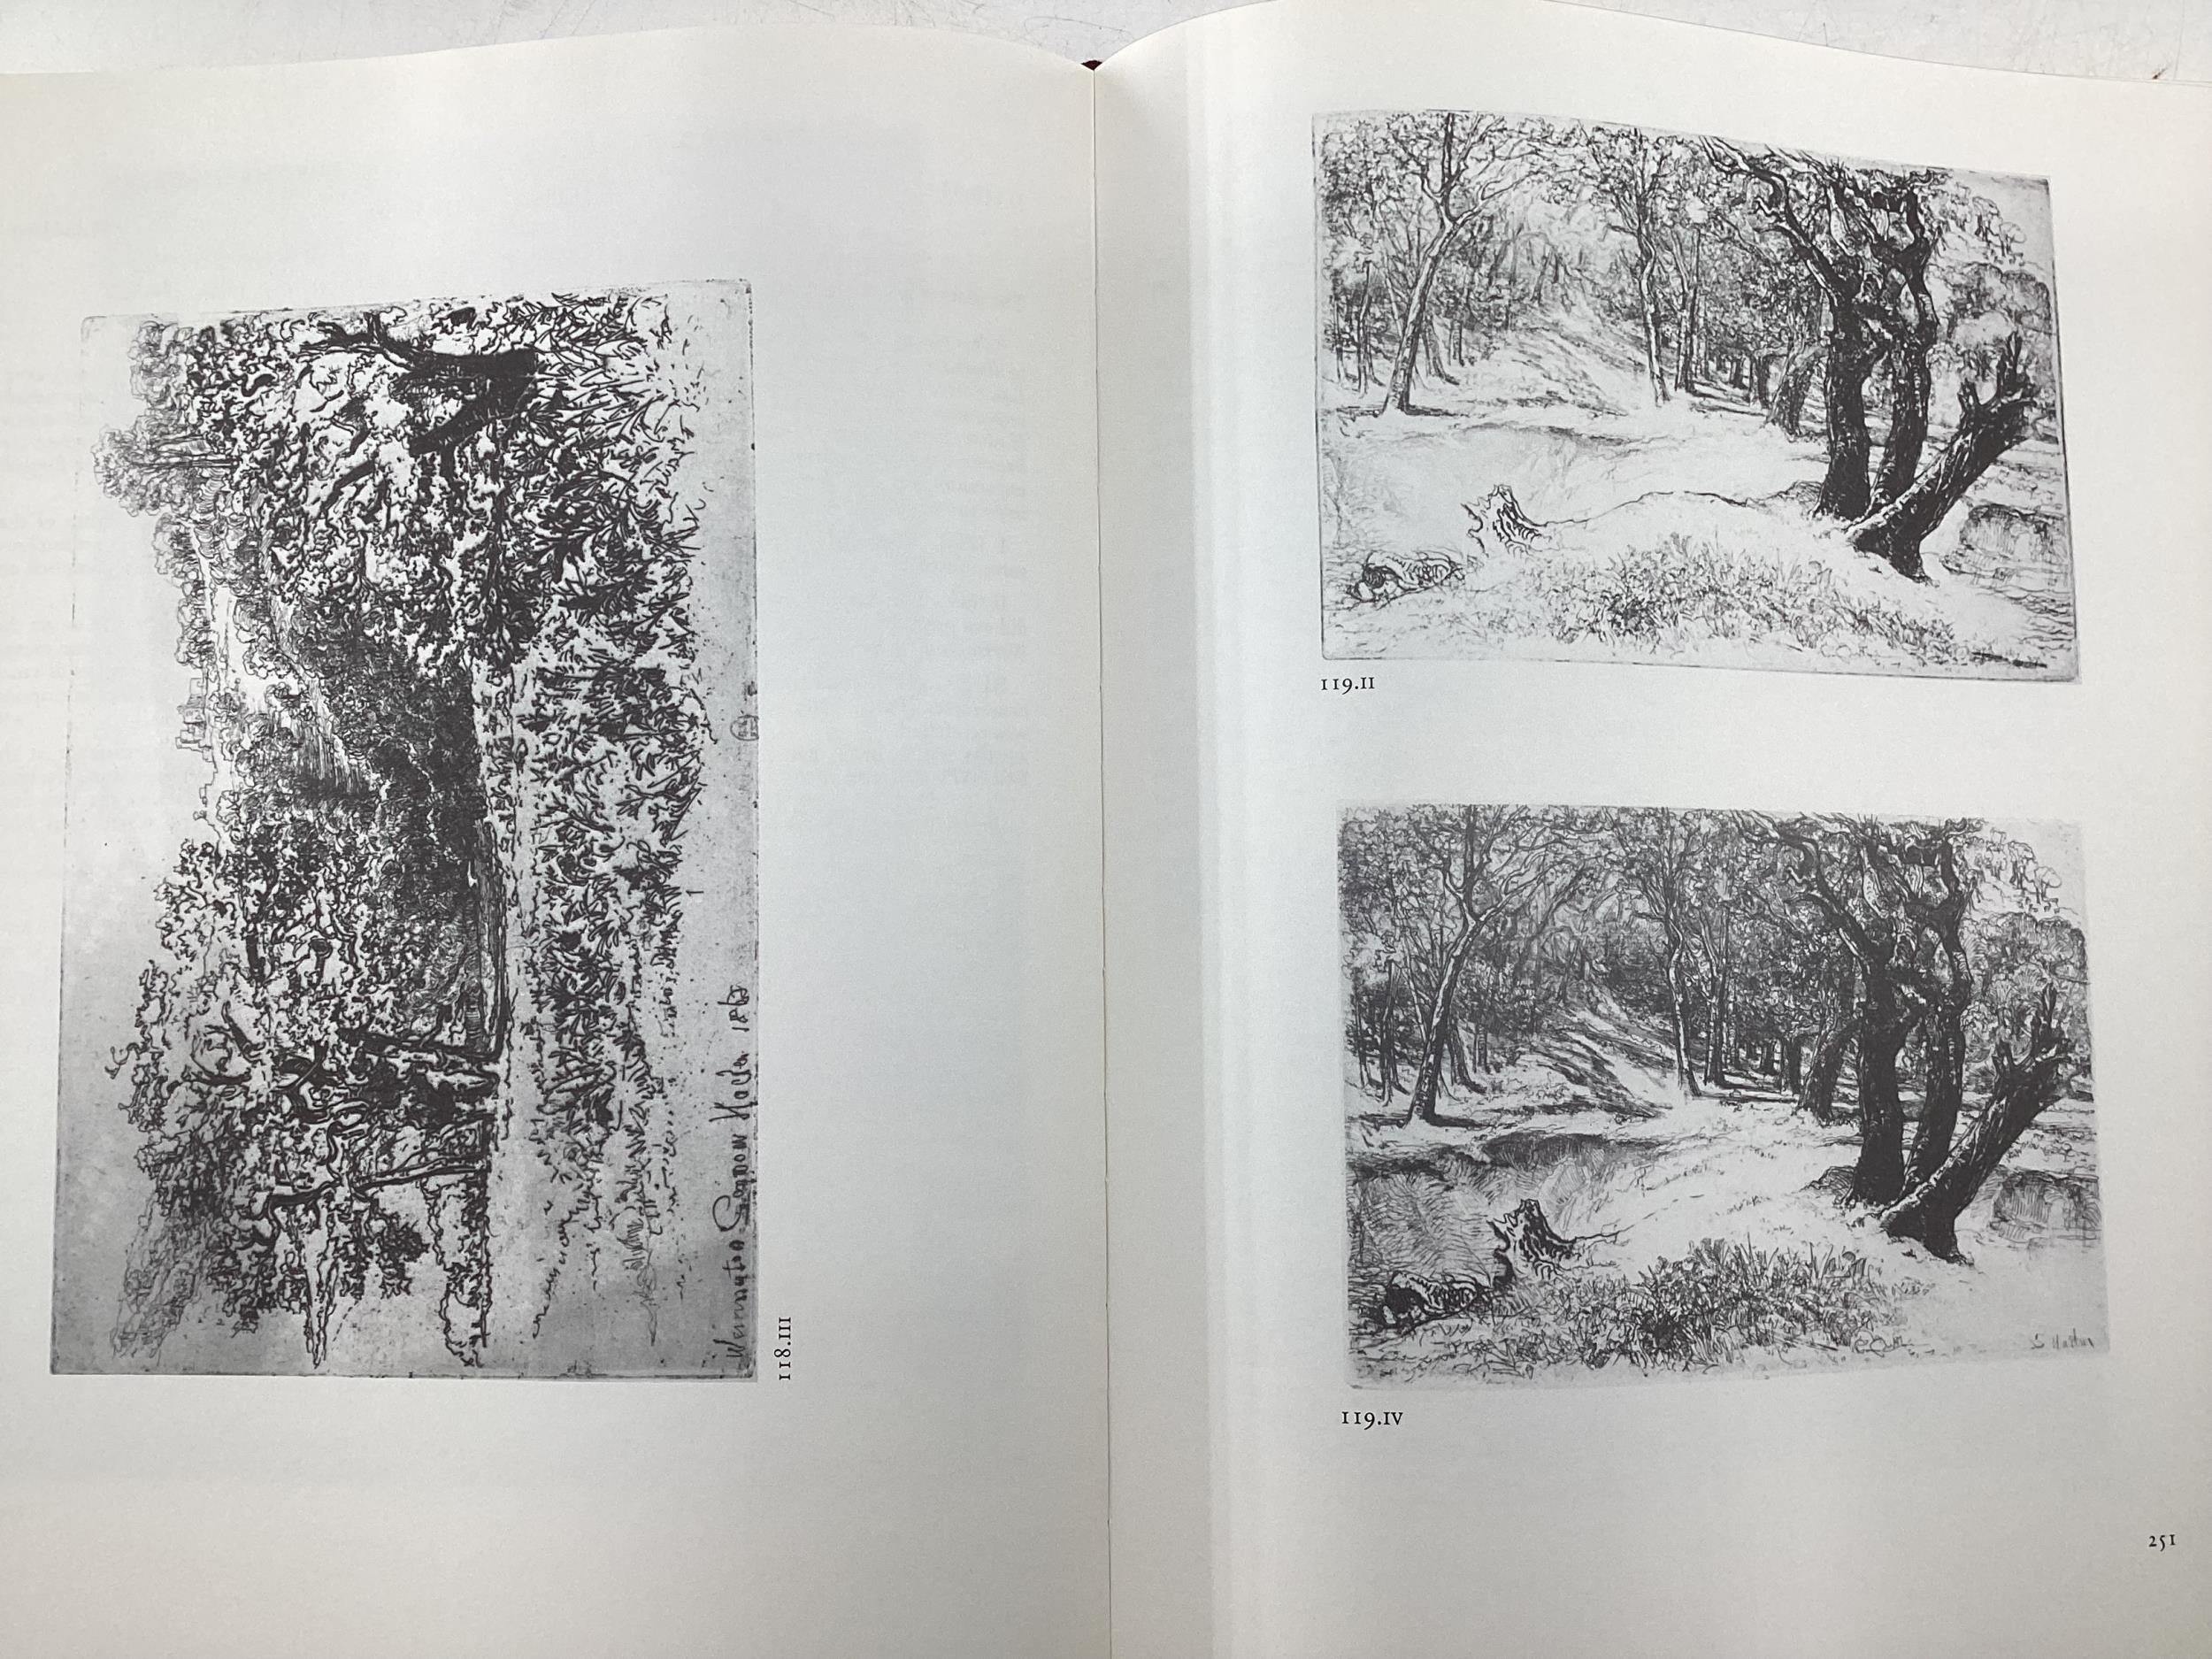 Hardback book: A catalogue Raisonne of the Prints of Sir Francis Seymour Haden, and a pen sketch - Image 4 of 5